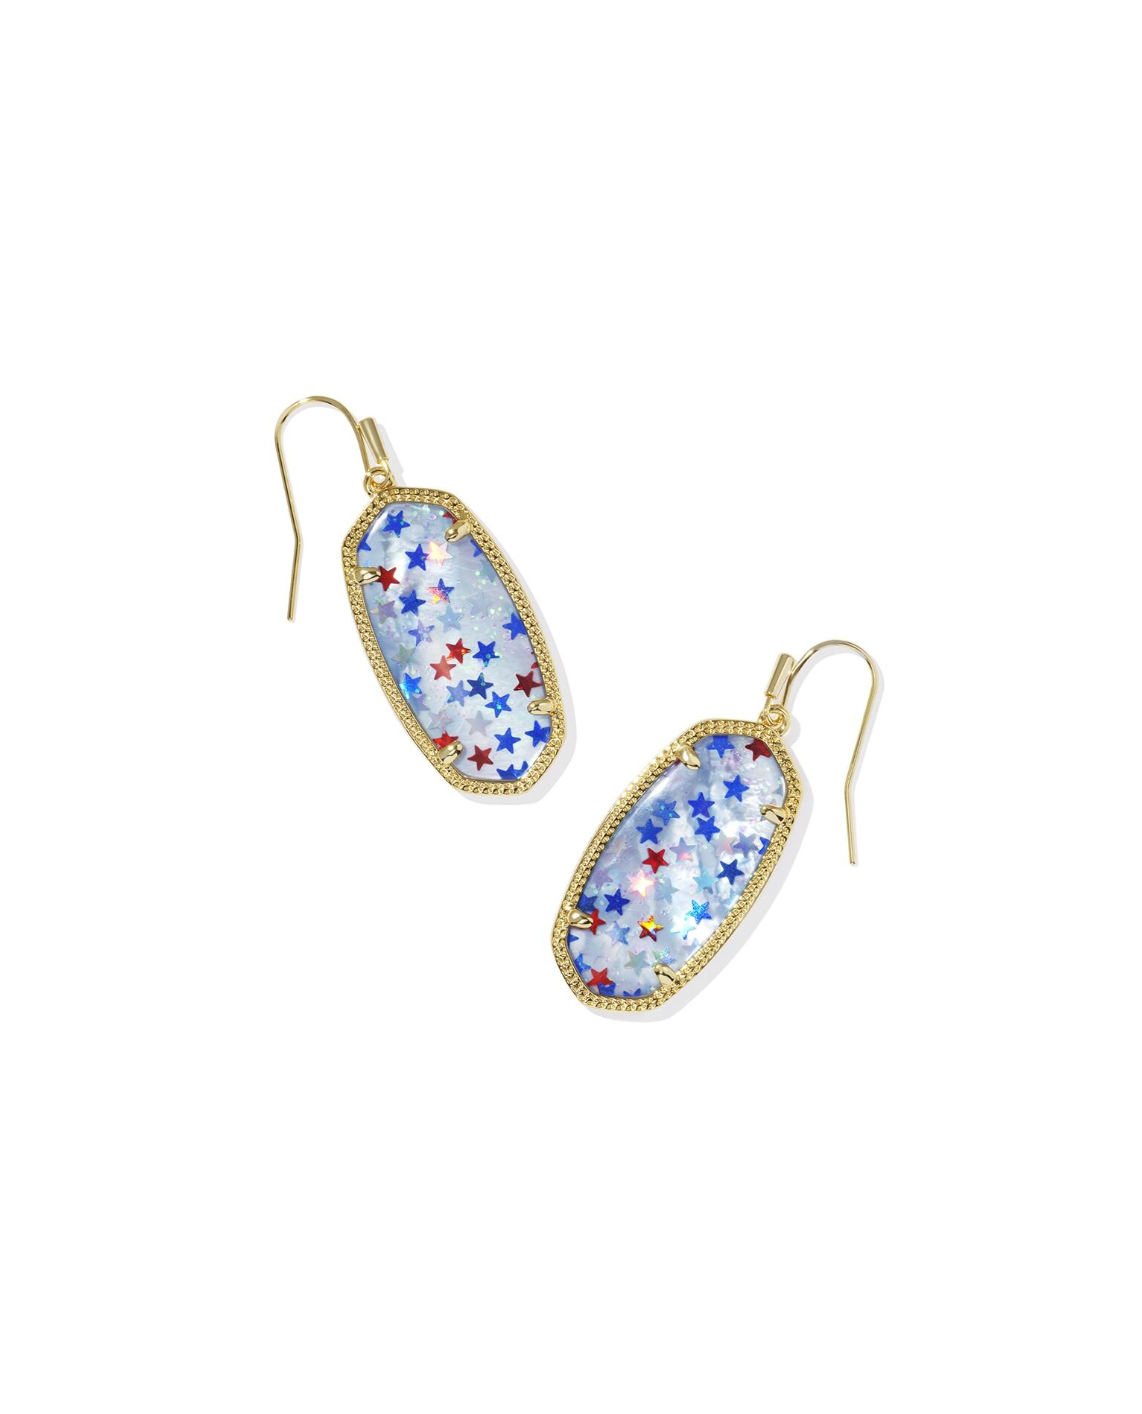 Elle Drop Earrings in Gold Red White Blue Star Illusion